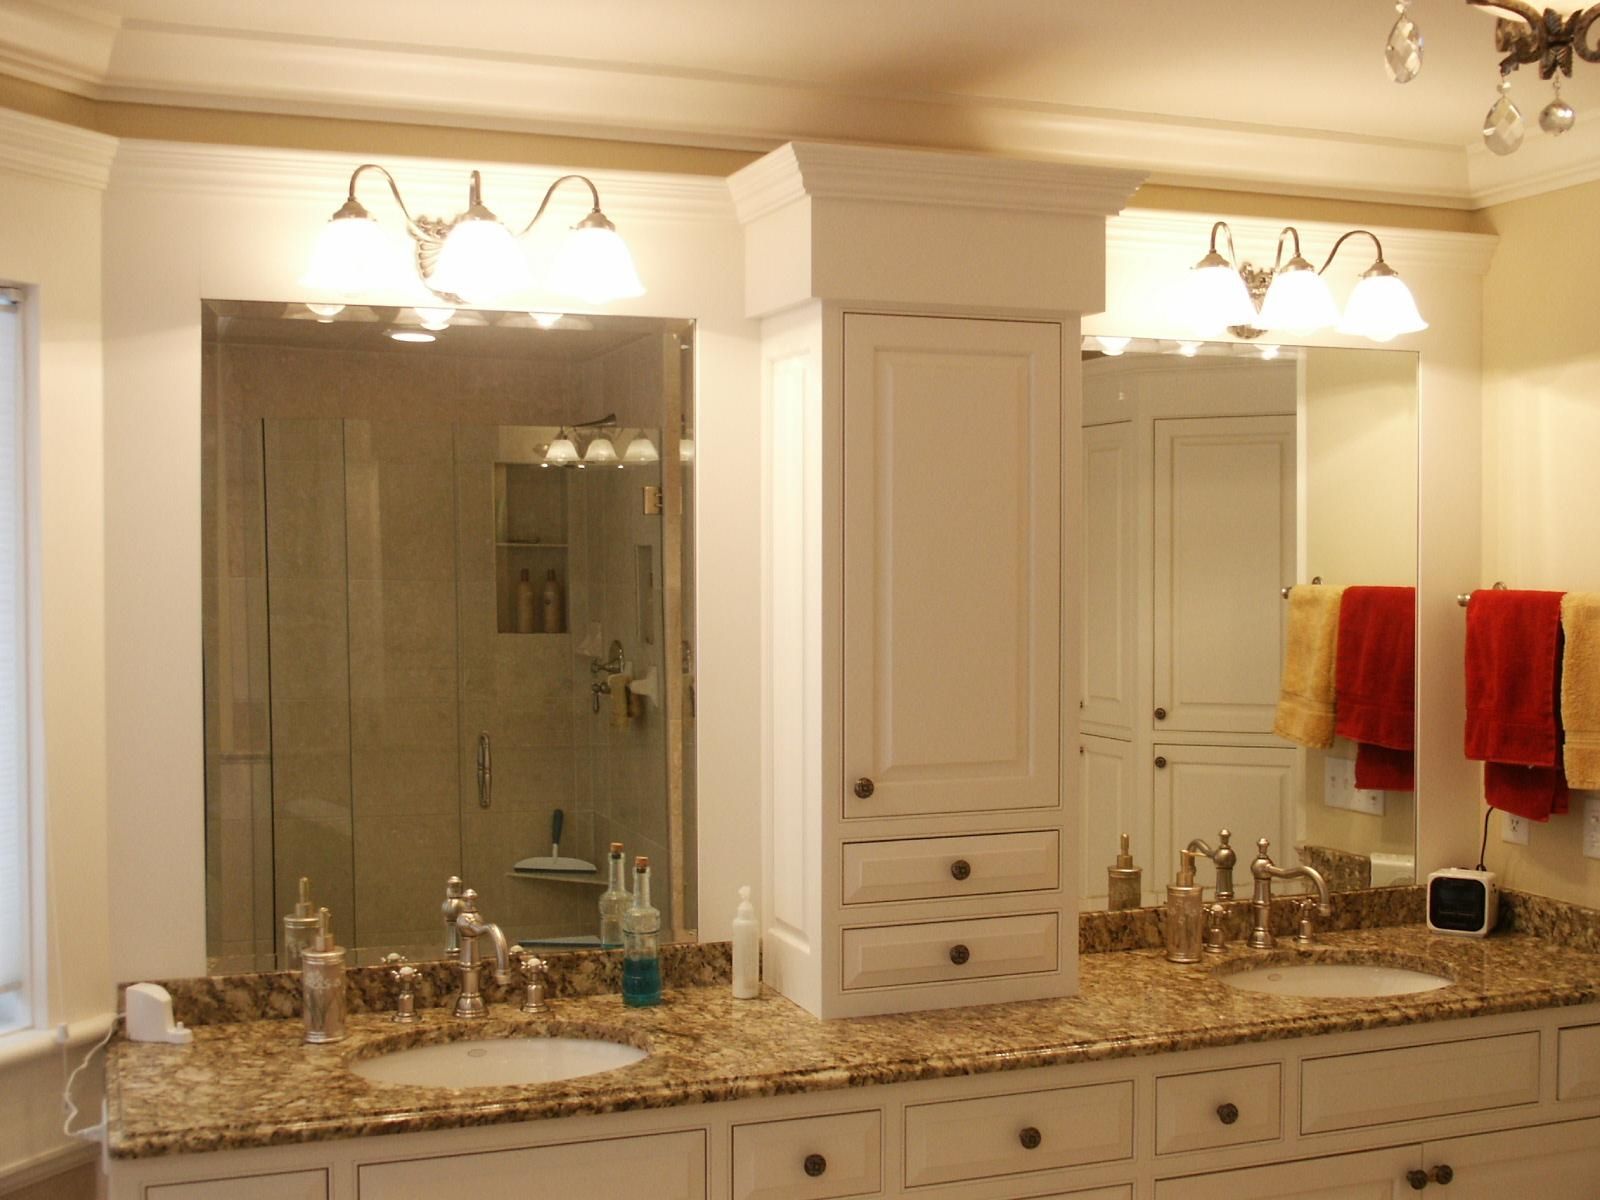 mirror ideas for small bathroom with 2 sinks